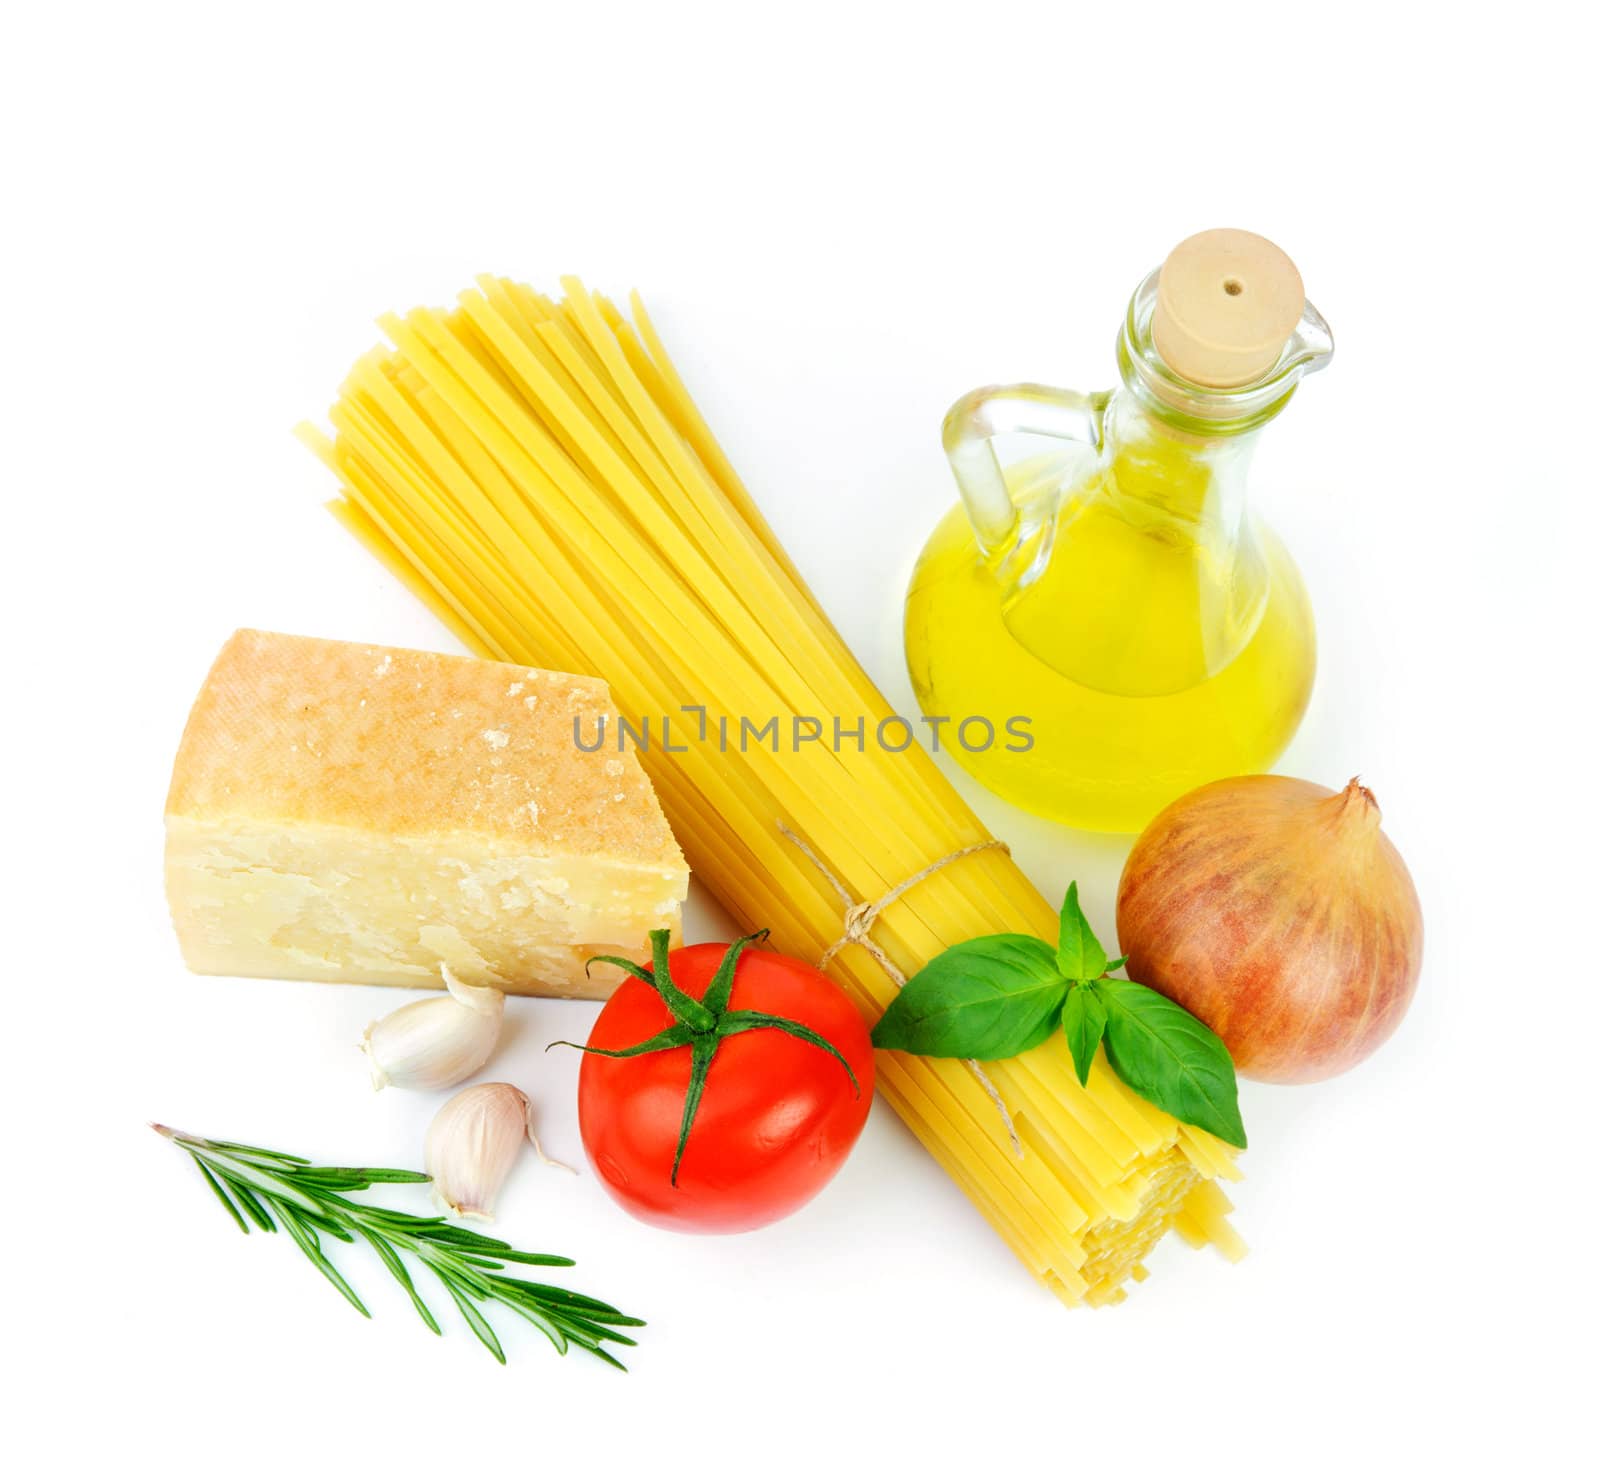 Close up of basic ingredients for italian pasta